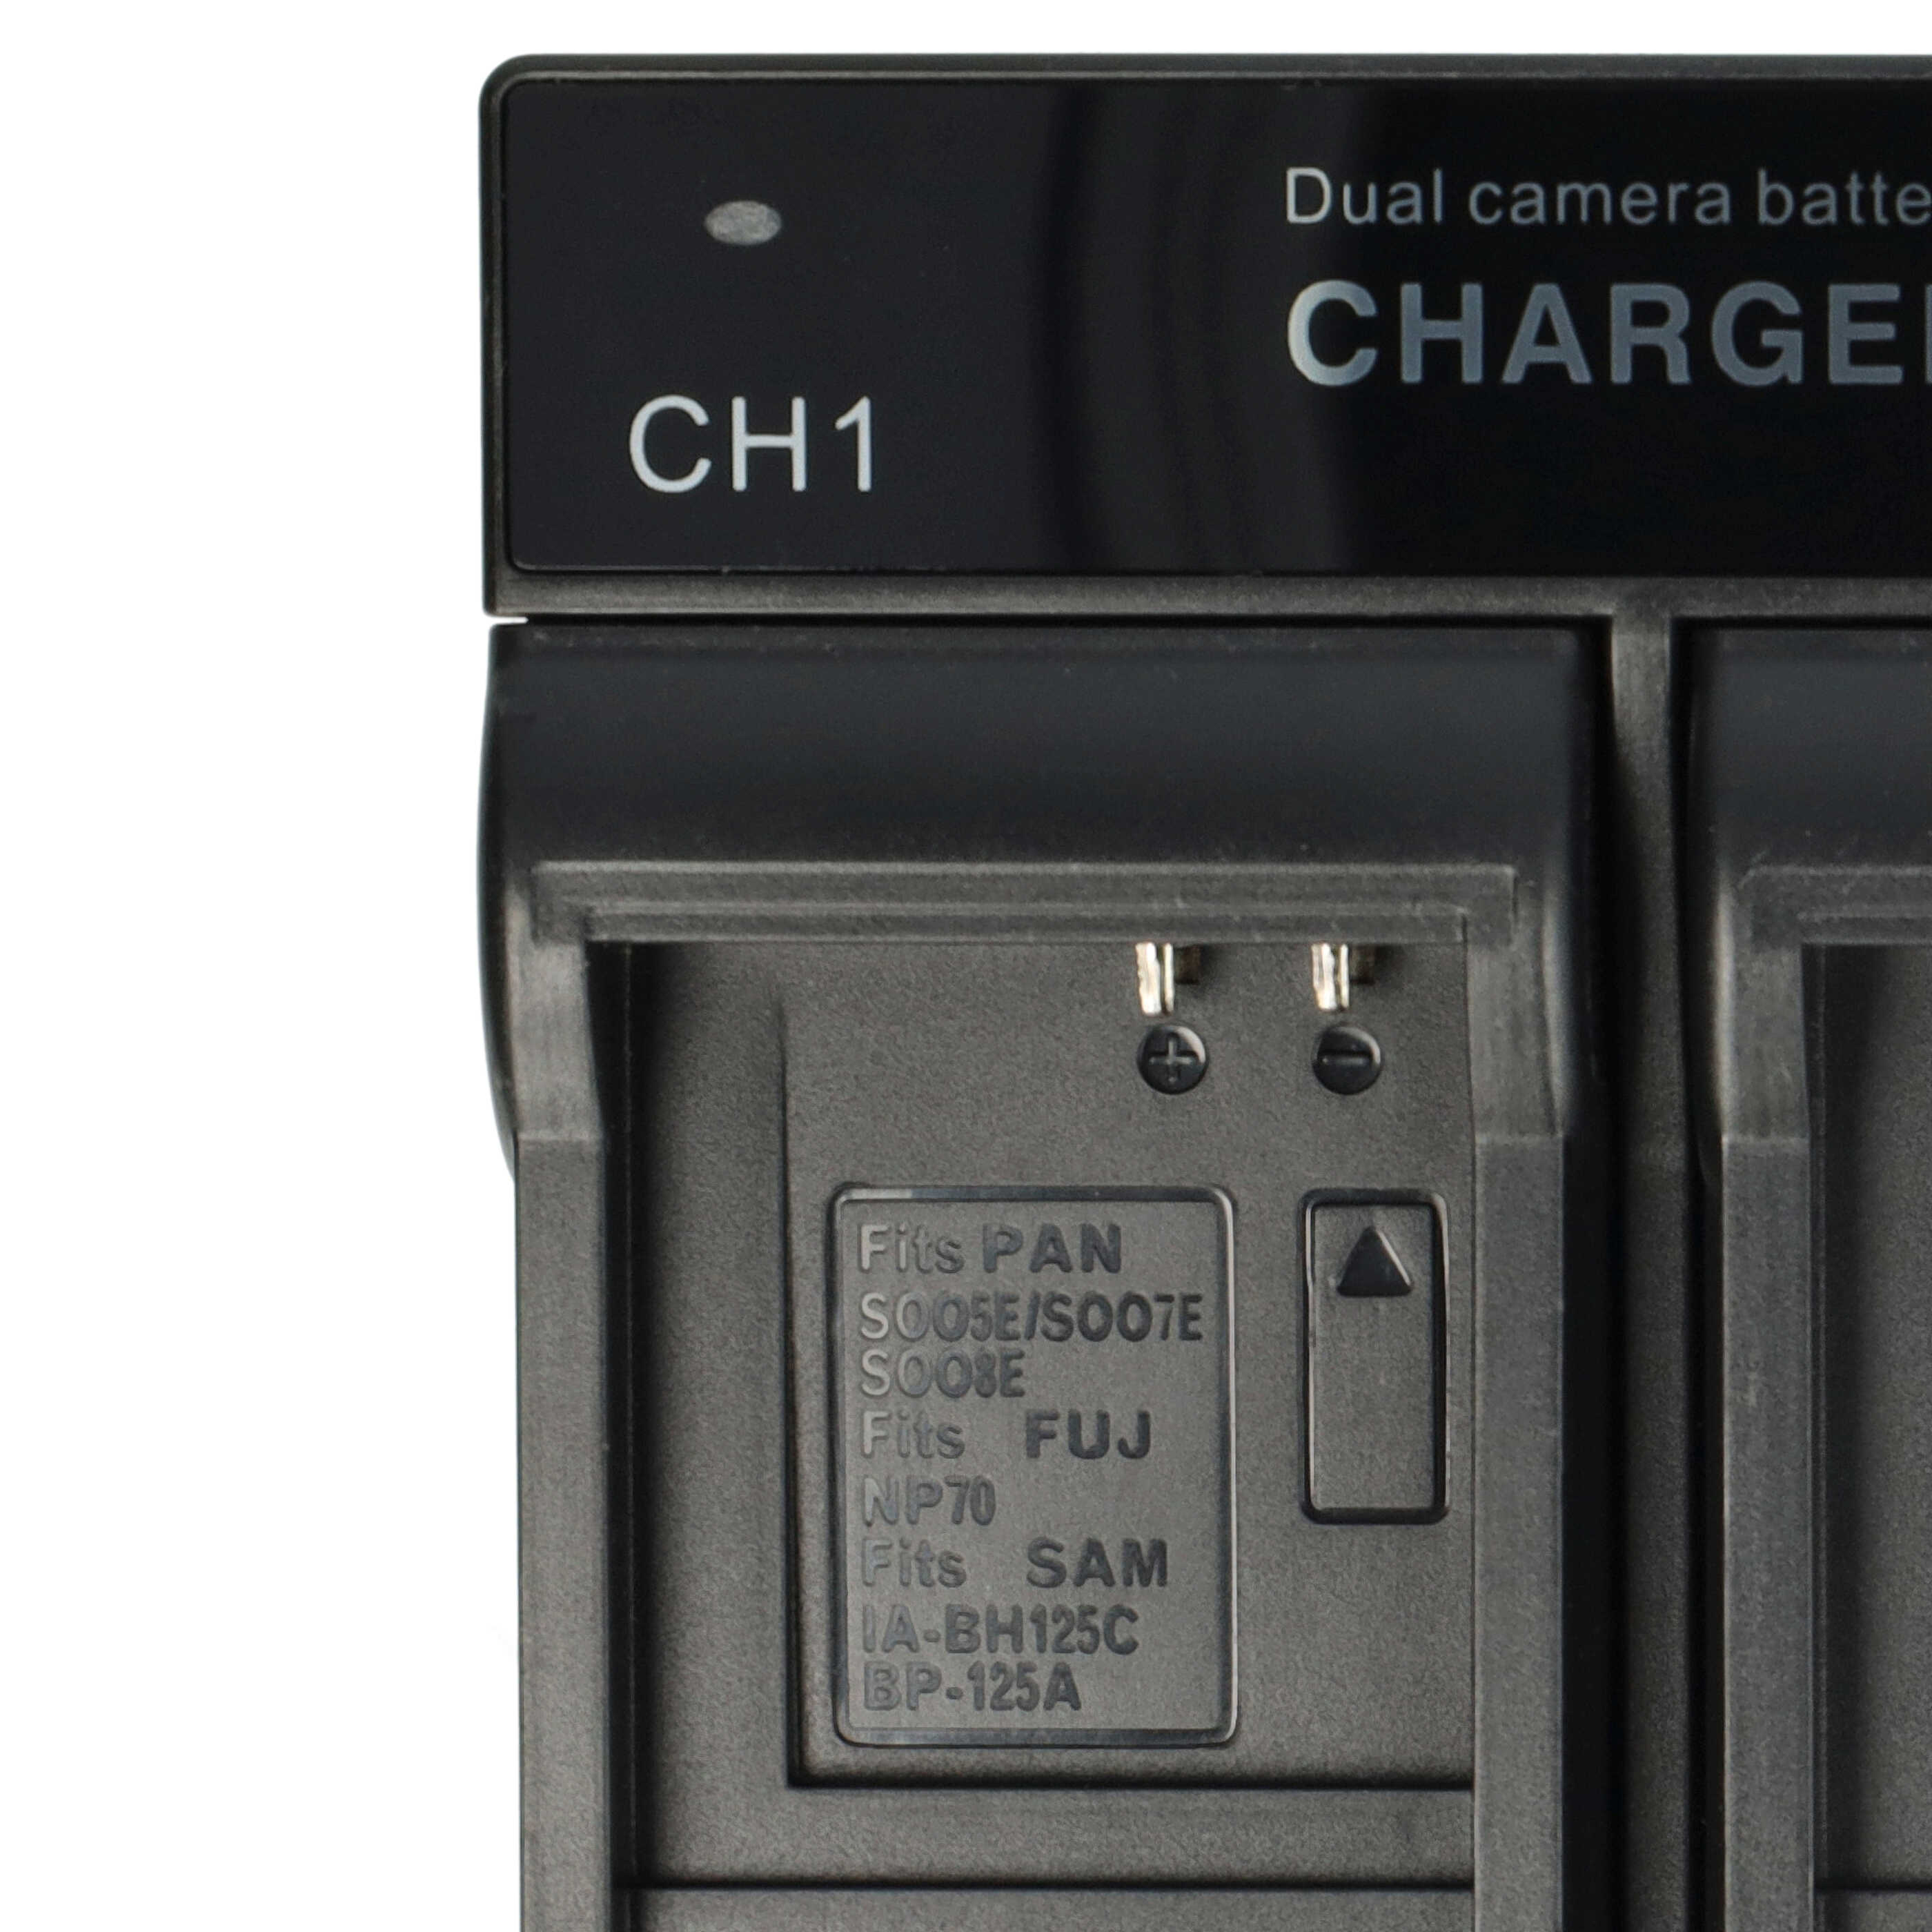 Battery Charger suitable for Fujifilm Digital Camera - 0.5 / 0.9 A, 4.2 / 8.4 V